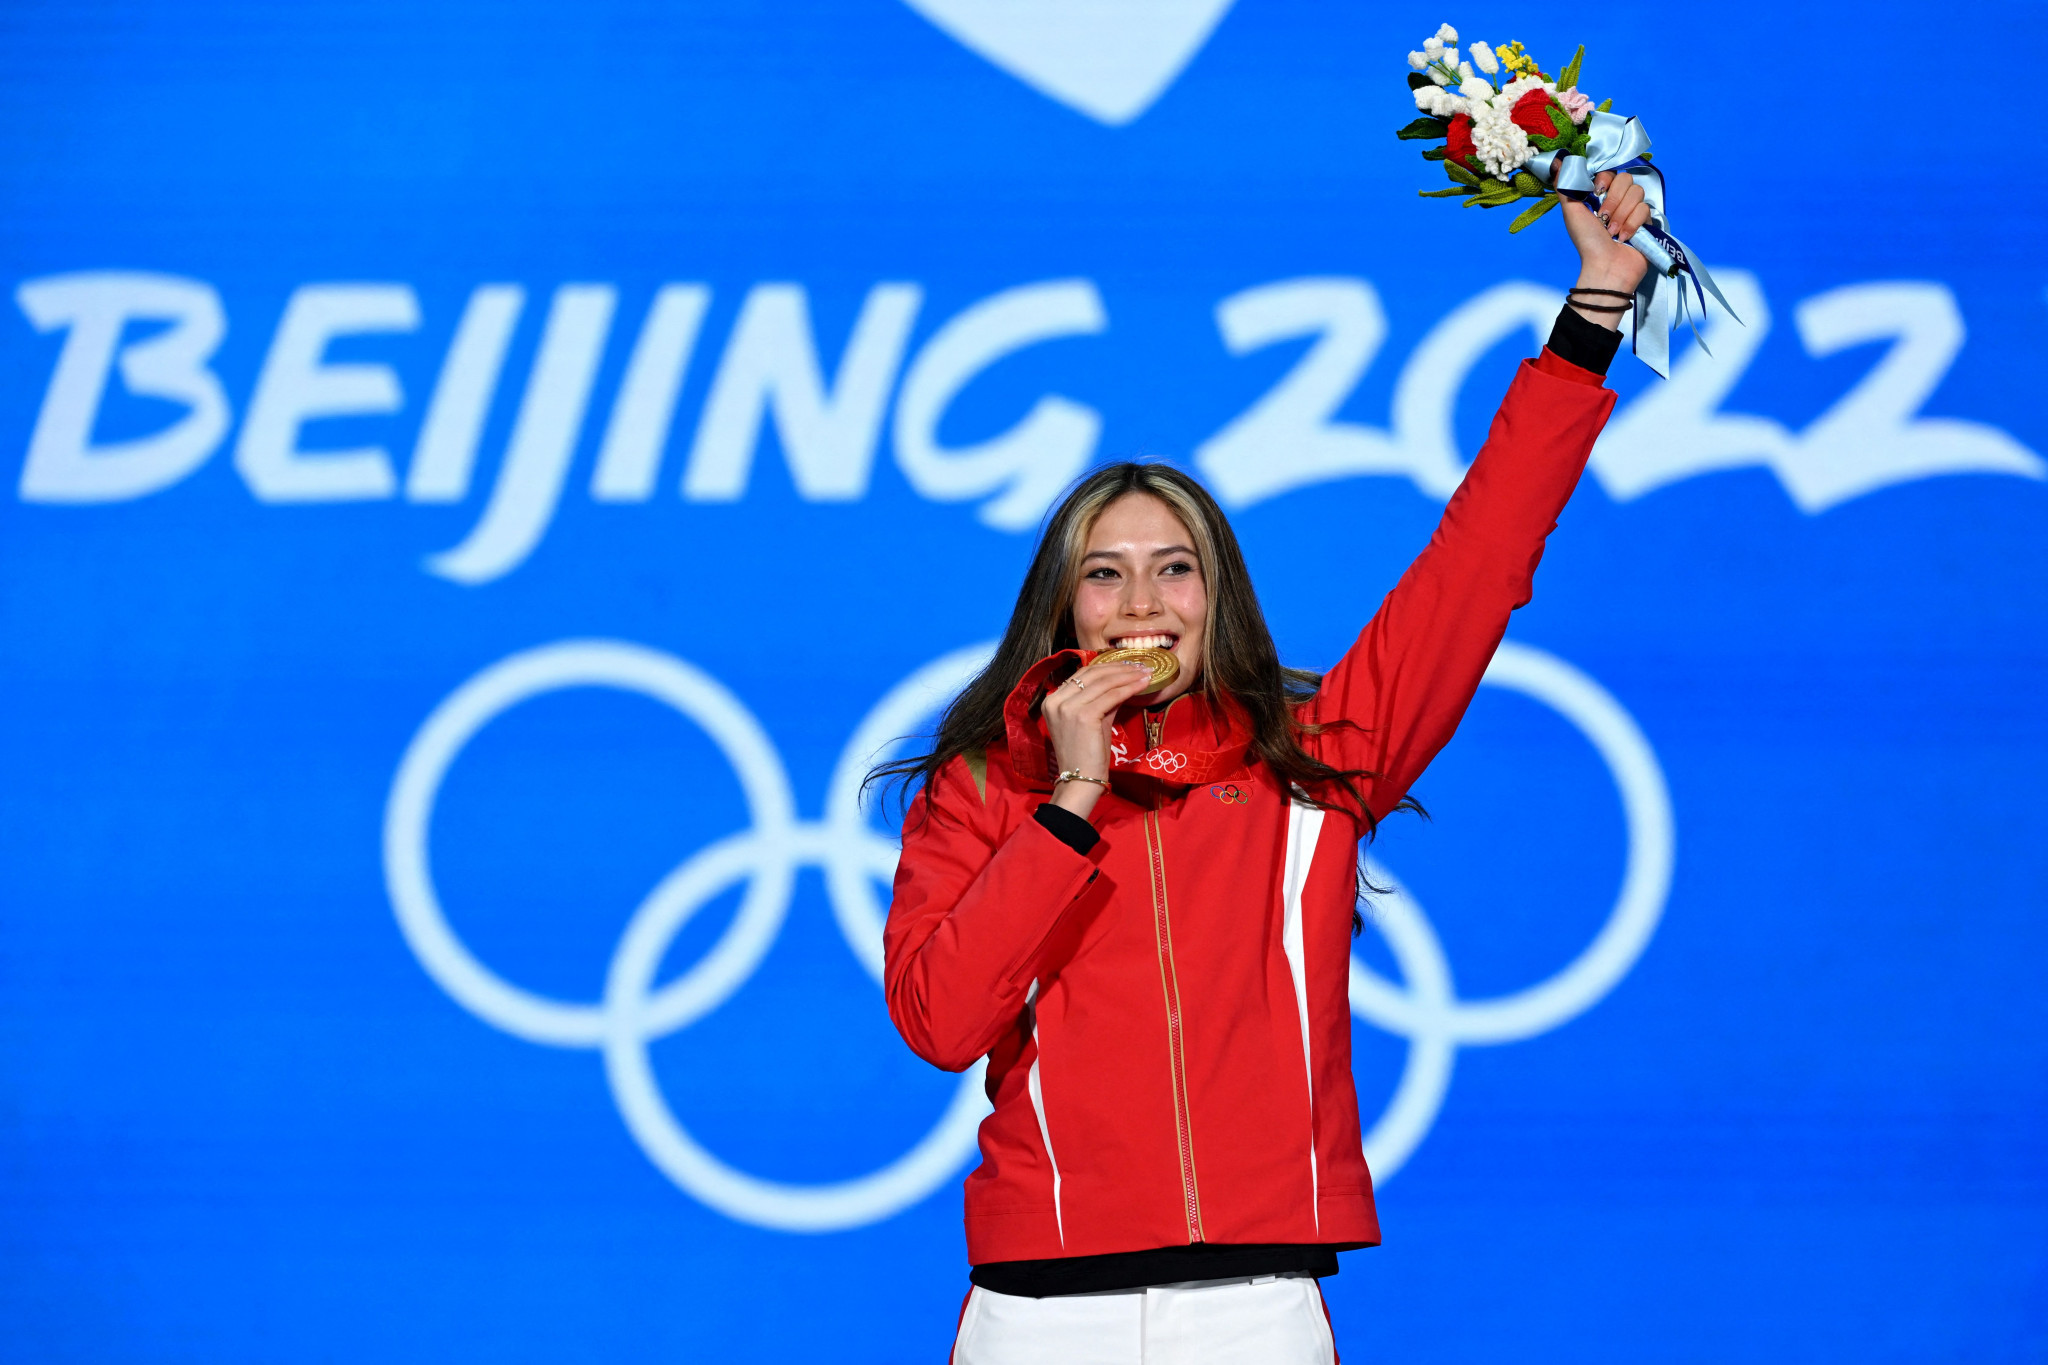 Eileen Gu lived up to sky-high expectations by winning the women's ski big air Olympic gold medal ©Getty Images